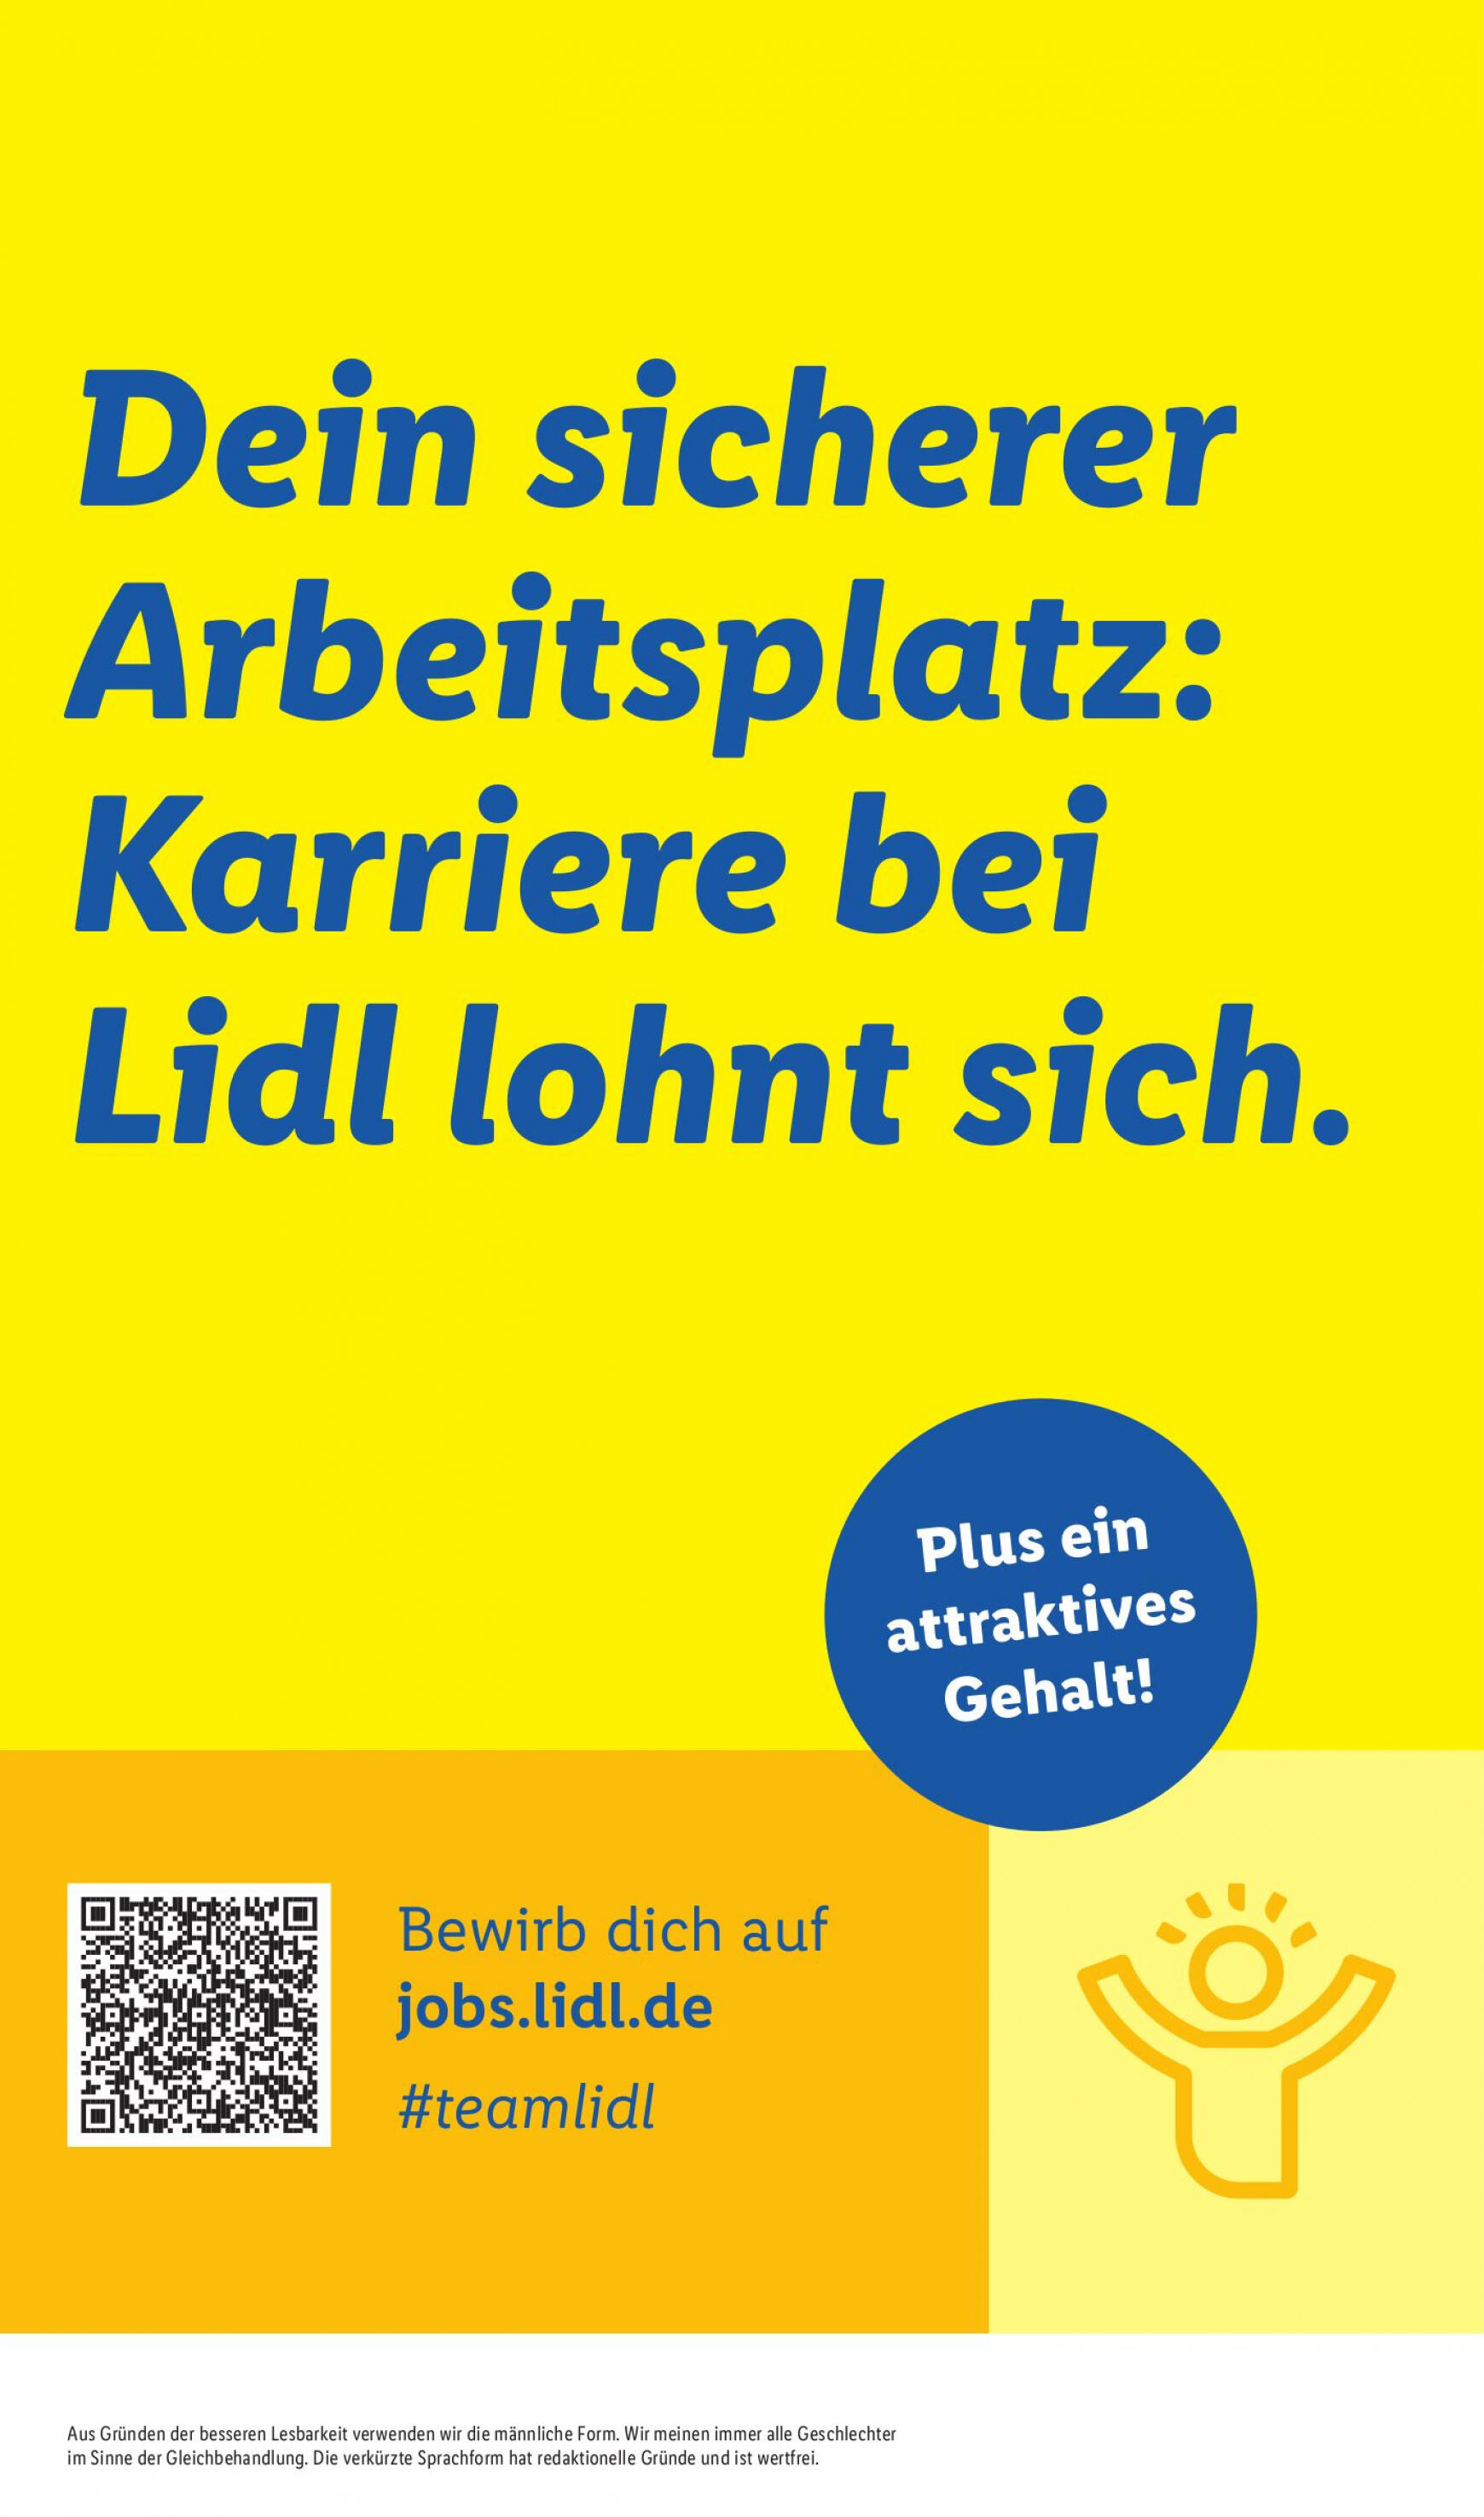 lidl - Flyer Lidl aktuell 13.05. - 18.05. - page: 55